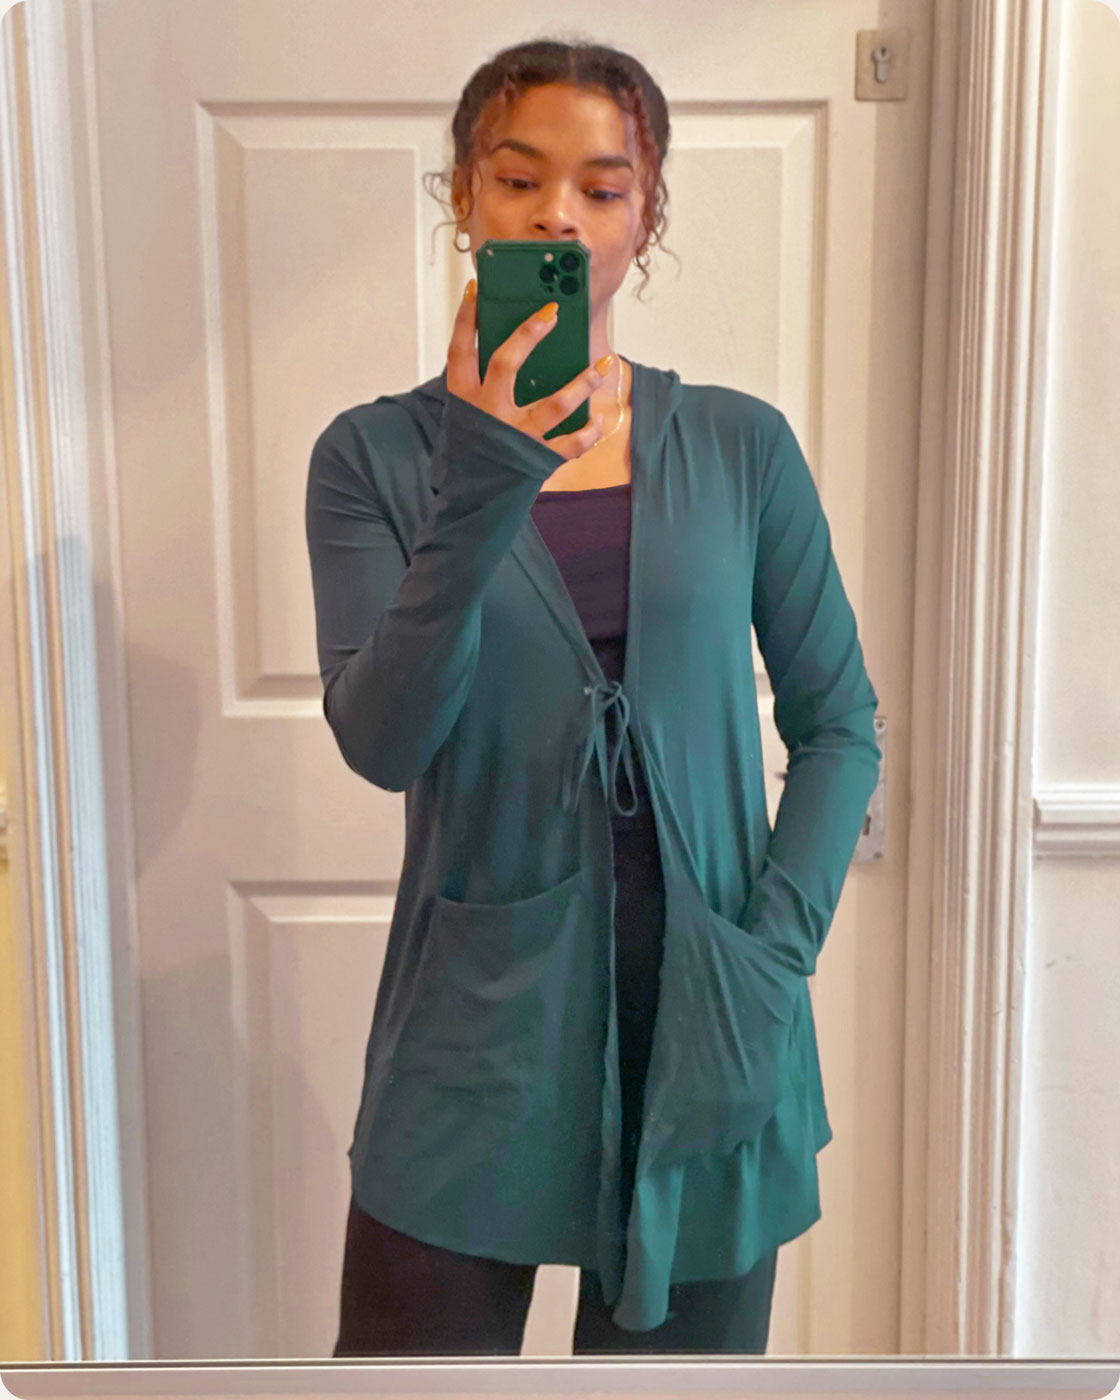 A customer taking a selfie while posing in an emerald green Move It Cardigan, a modest sportswear cardigan from Veil Garments.